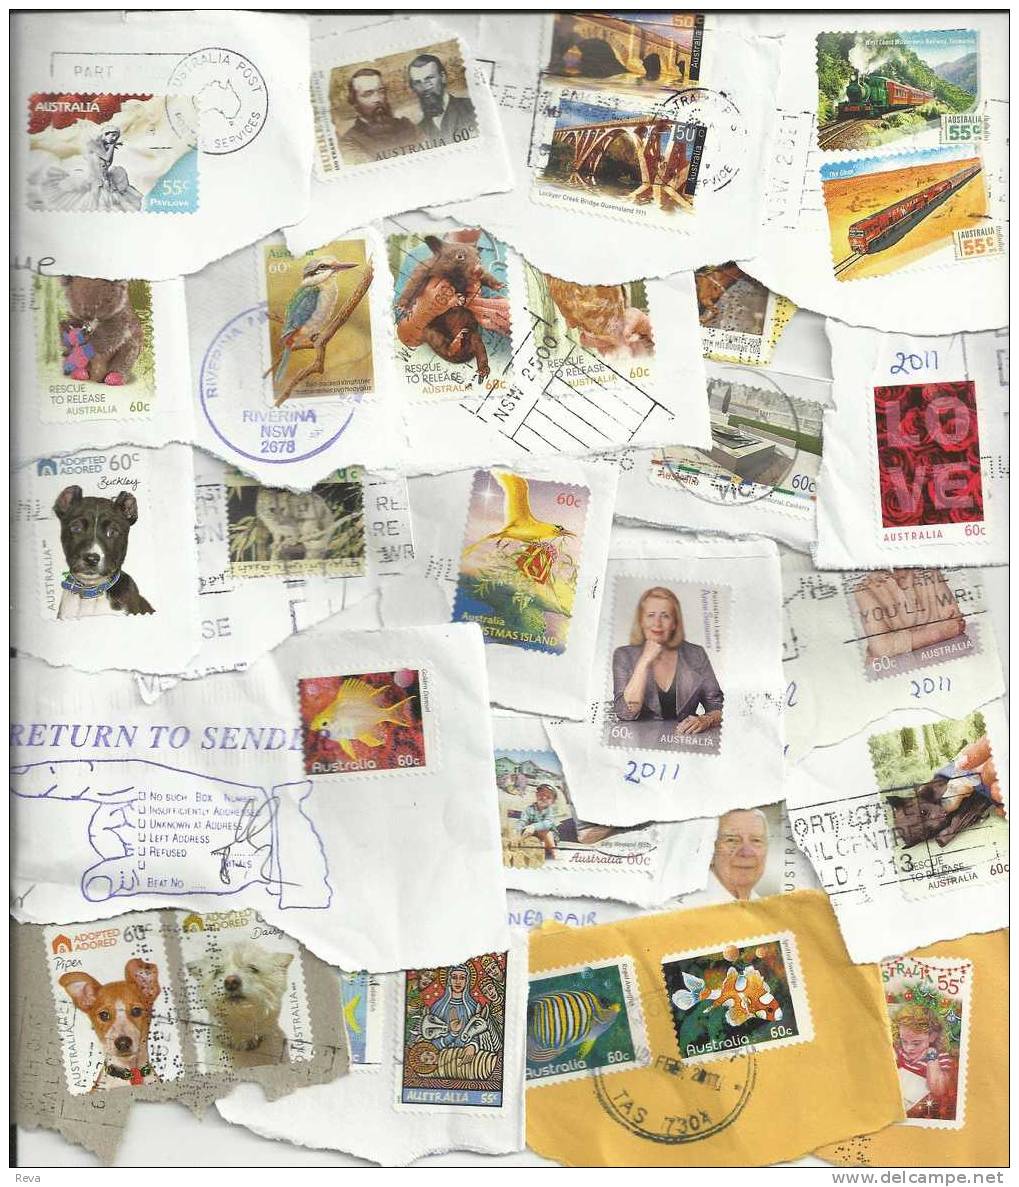 AUSTRALIA LOT82 MIXTURE OF 50+ USED STAMPS SOME 2010/11 ISSUES INC.ISLANDS  BIRD BUTTERFLY ETC.READ DESCRIPTION!! - Lots & Kiloware (mixtures) - Max. 999 Stamps